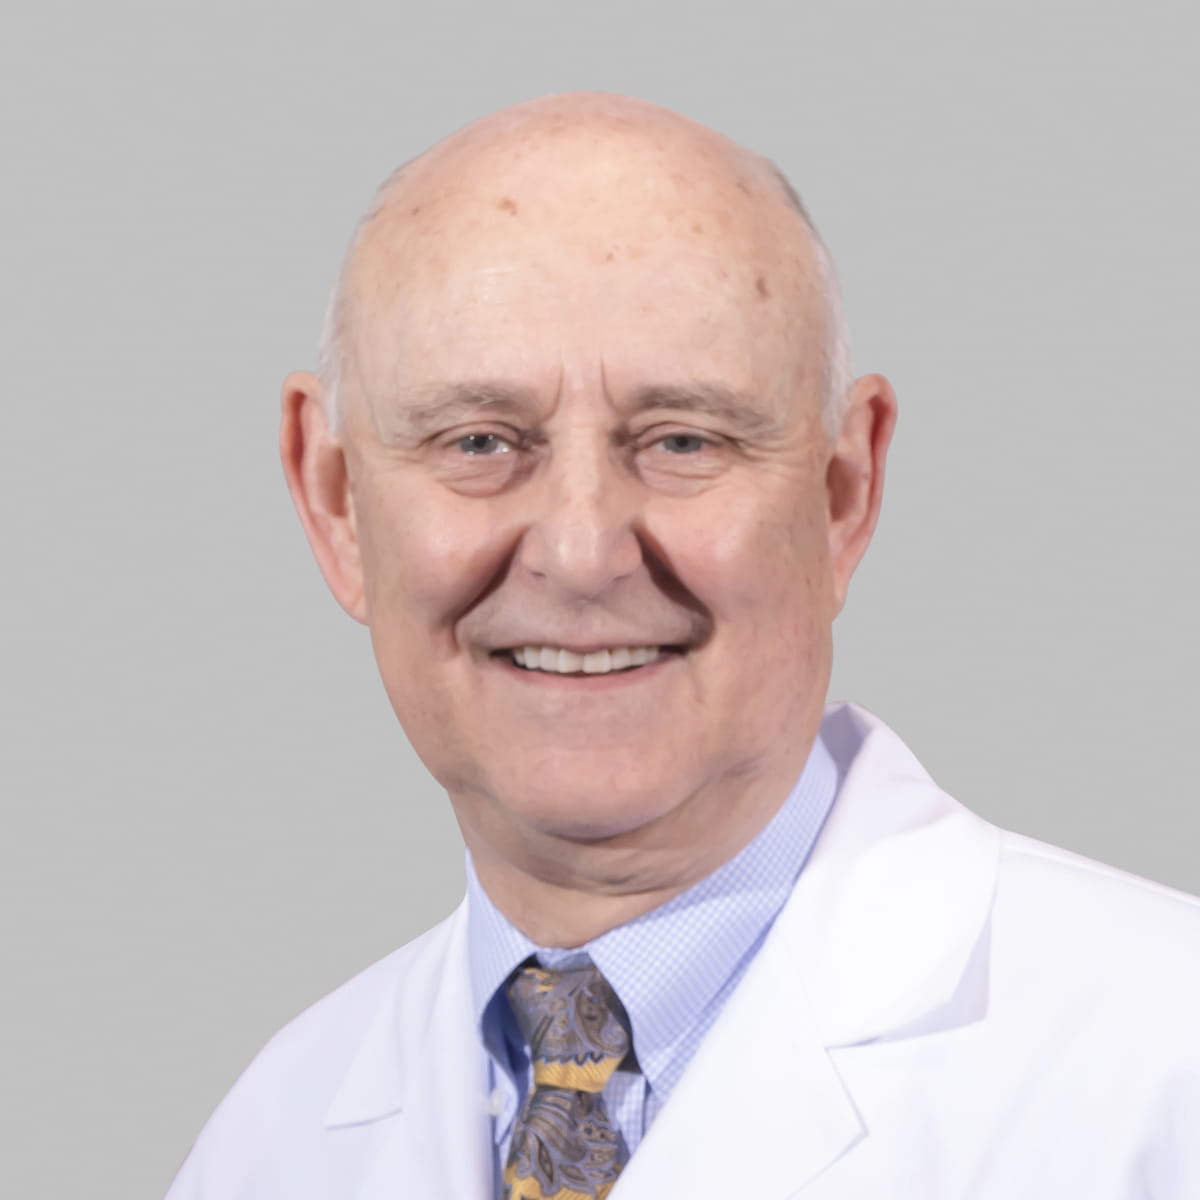 A friendly image of David Cantrell, MD